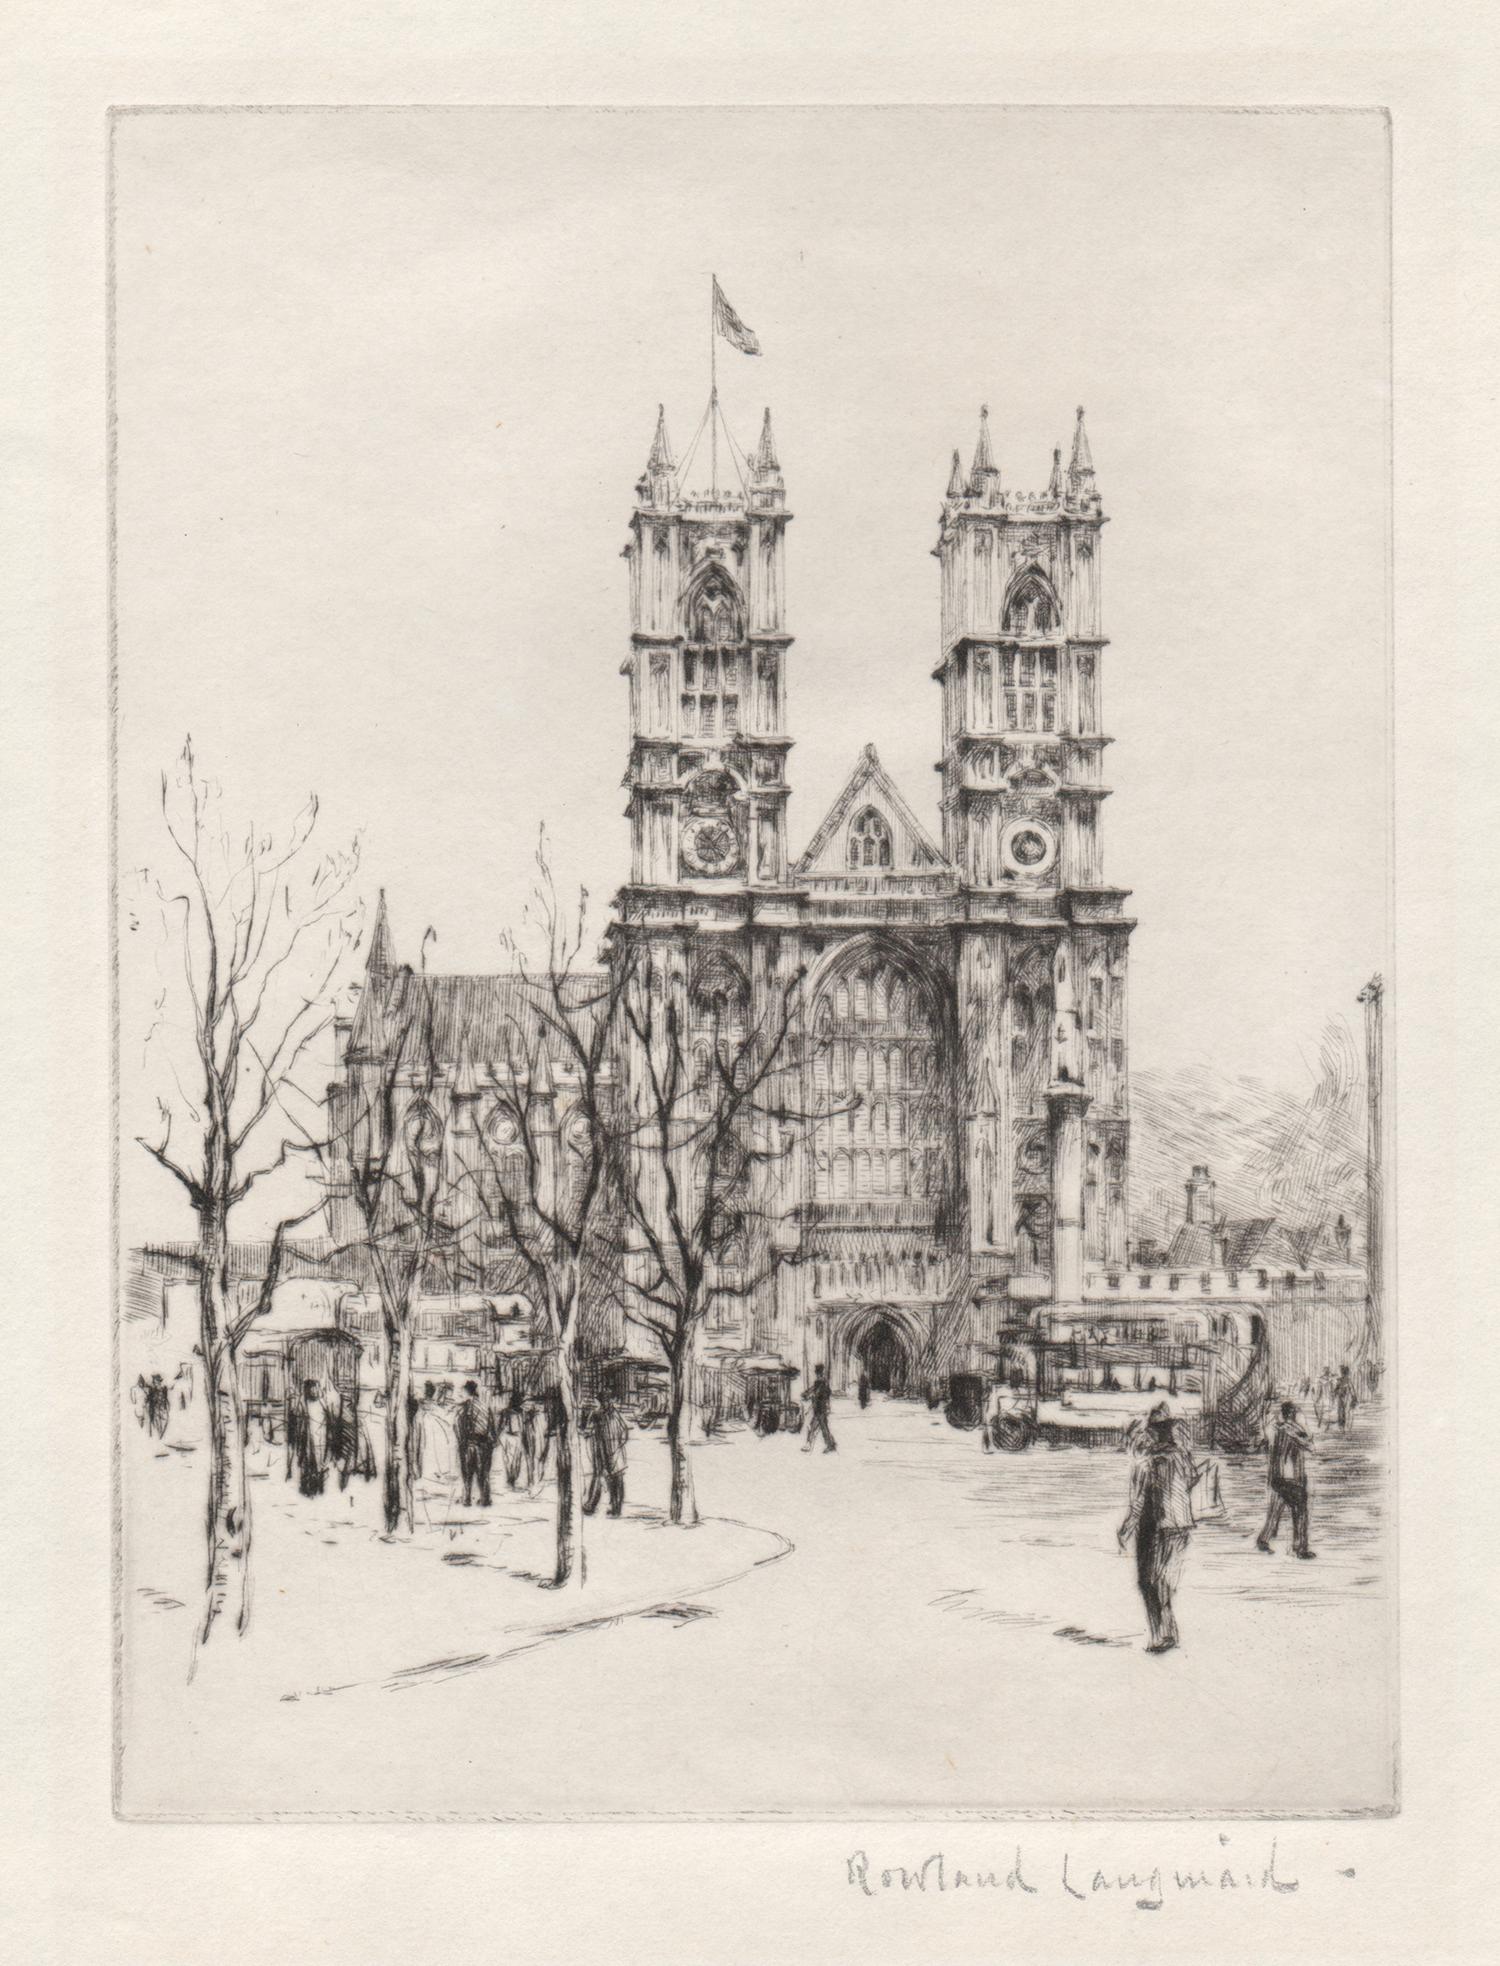 Westminster Abbey, London. Rowland Langmaid signed artist etching print